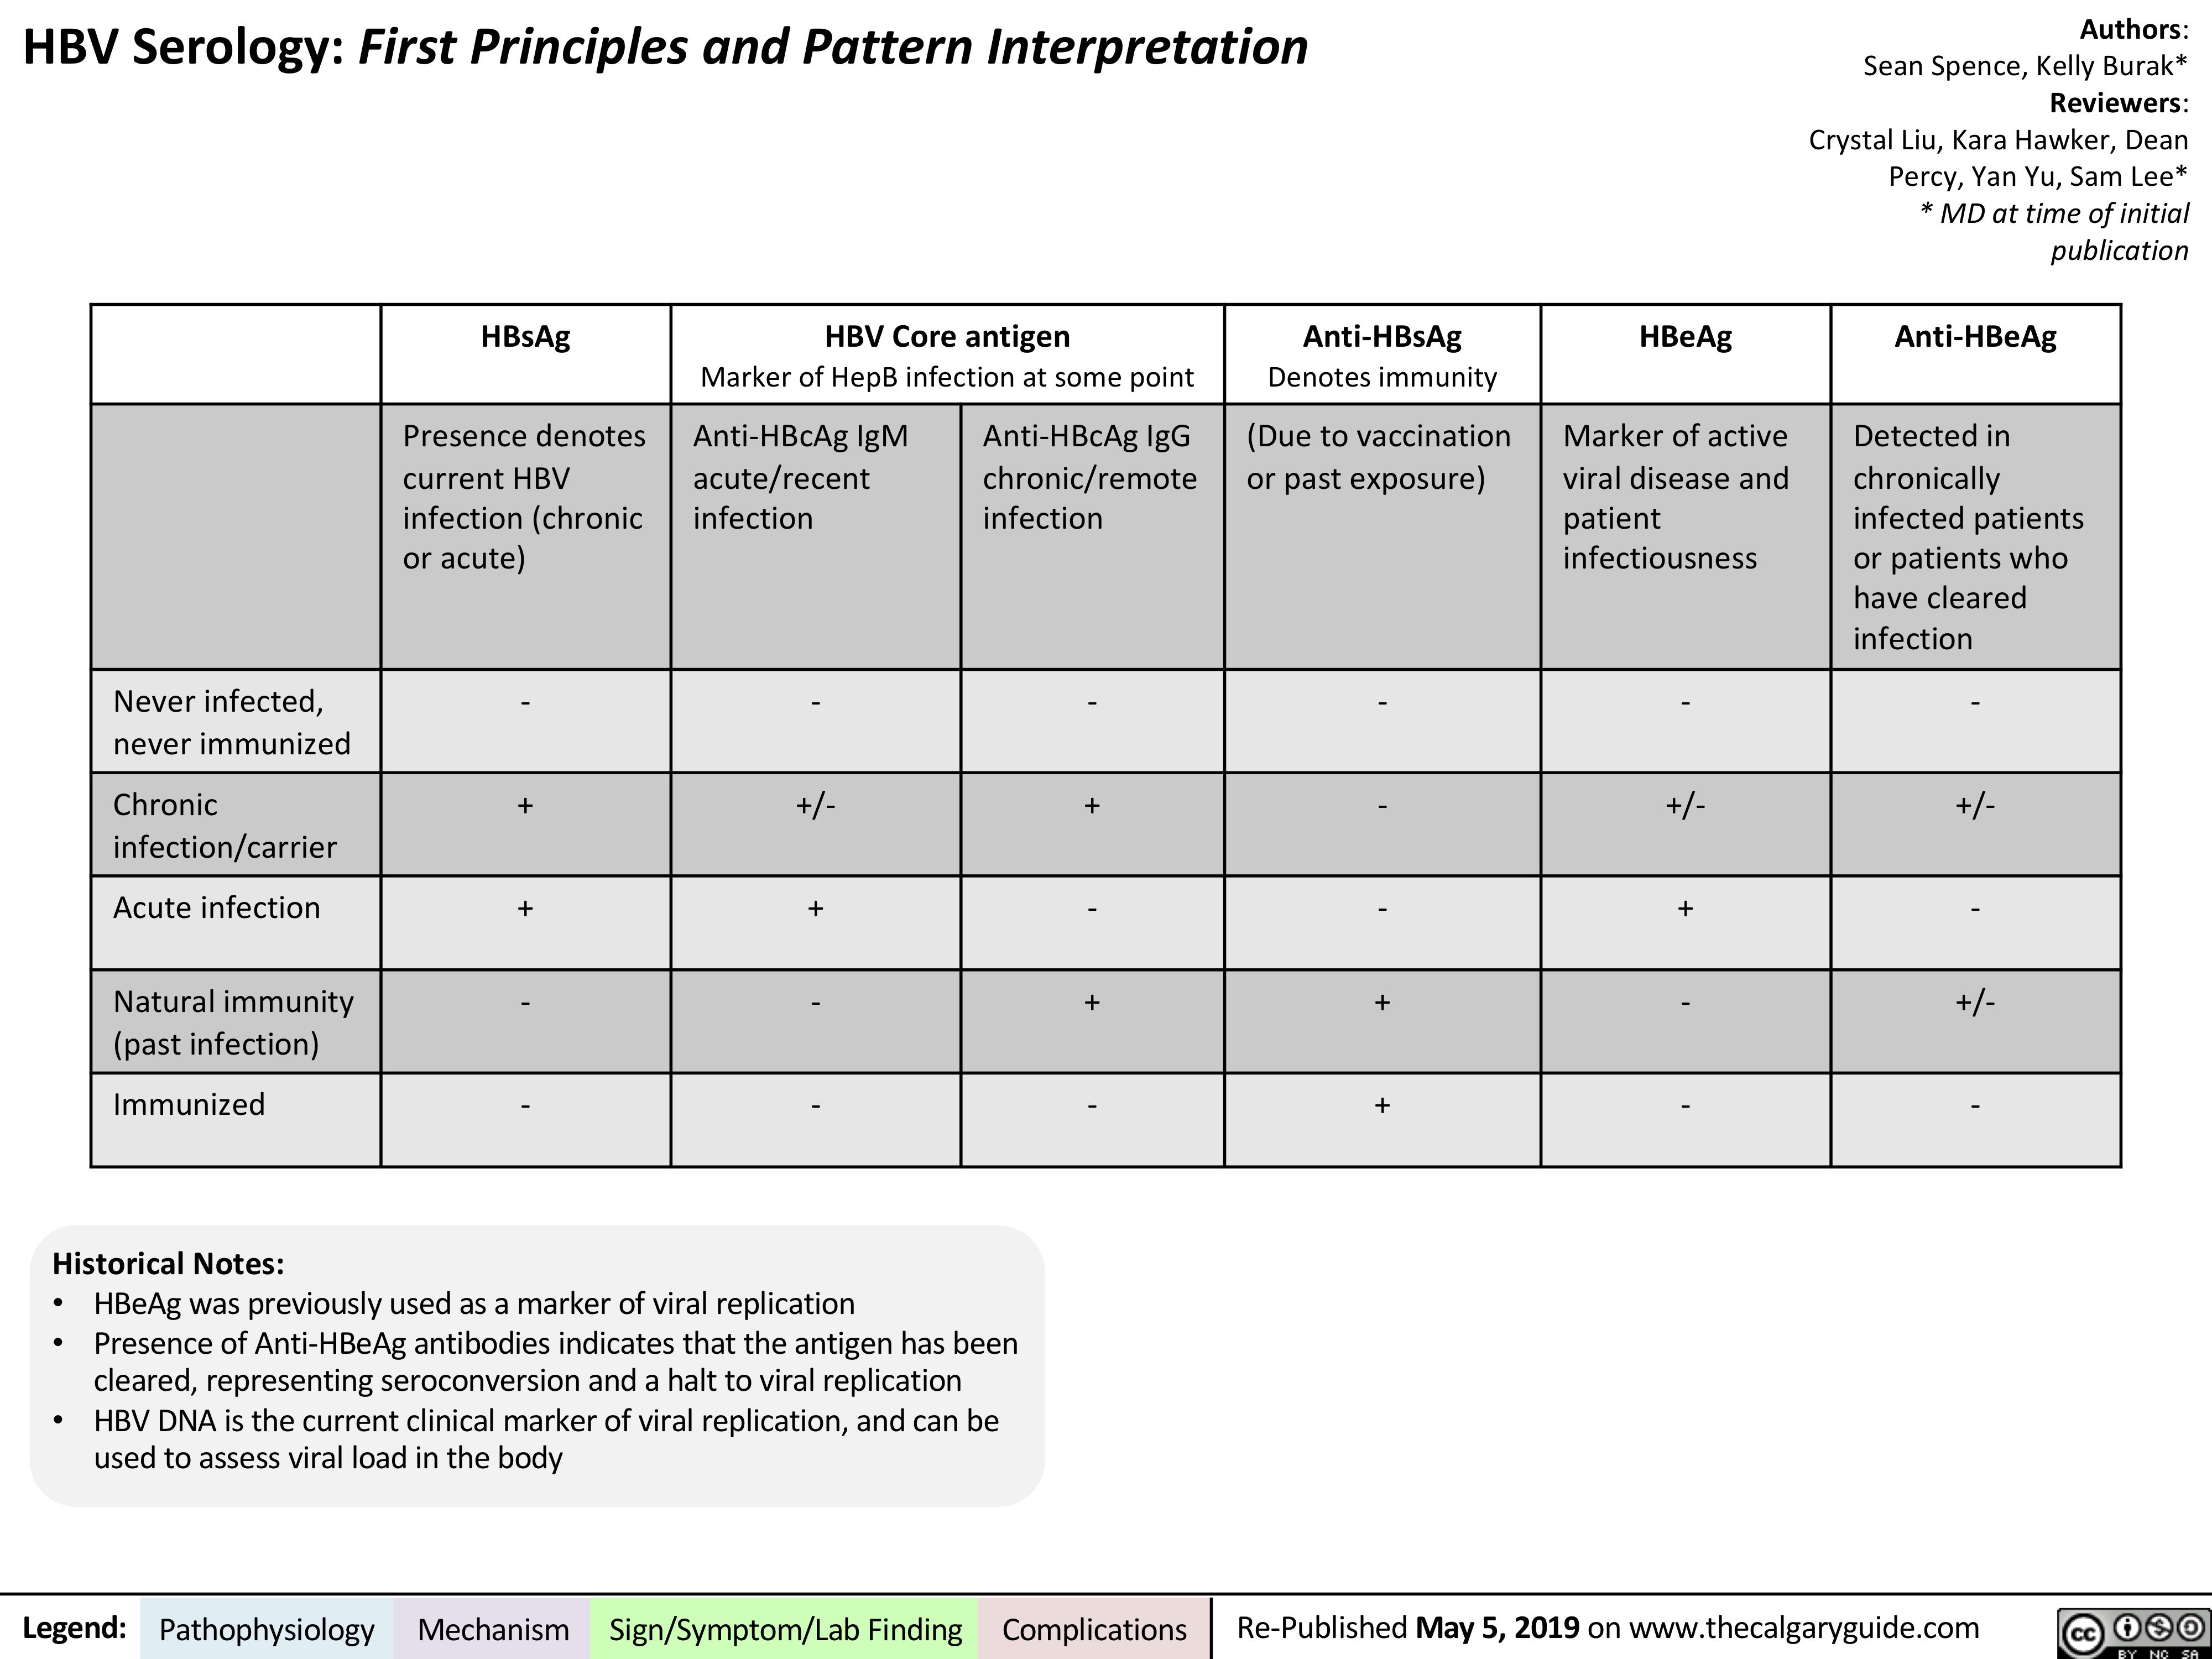 HBV Serology: First Principles and Pattern Interpretation
Authors: Sean Spence, Kelly Burak* Reviewers: Crystal Liu, Kara Hawker, Dean Percy, Yan Yu, Sam Lee* * MD at time of initial publication
        HBsAg
HBV Core antigen
Marker of HepB infection at some point
Anti-HBsAg
Denotes immunity
HBeAg
Anti-HBeAg
Presence denotes current HBV infection (chronic or acute)
Anti-HBcAg IgM acute/recent infection
Anti-HBcAg IgG chronic/remote infection
(Due to vaccination or past exposure)
Marker of active viral disease and patient infectiousness
Detected in chronically infected patients or patients who have cleared infection
Never infected, never immunized
-
-
-
-
-
-
Chronic infection/carrier
+
+/-
+
-
+/-
+/-
Acute infection
+
+
-
-
+
-
Natural immunity (past infection)
-
-
+
+
-
+/-
Immunized
-
-
-
+
-
-
                     Historical Notes:
• HBeAg was previously used as a marker of viral replication
• Presence of Anti-HBeAg antibodies indicates that the antigen has been
cleared, representing seroconversion and a halt to viral replication
• HBV DNA is the current clinical marker of viral replication, and can be
used to assess viral load in the body
 Legend:
 Pathophysiology
 Mechanism
Sign/Symptom/Lab Finding
  Complications
Re-Published May 5, 2019 on www.thecalgaryguide.com
   